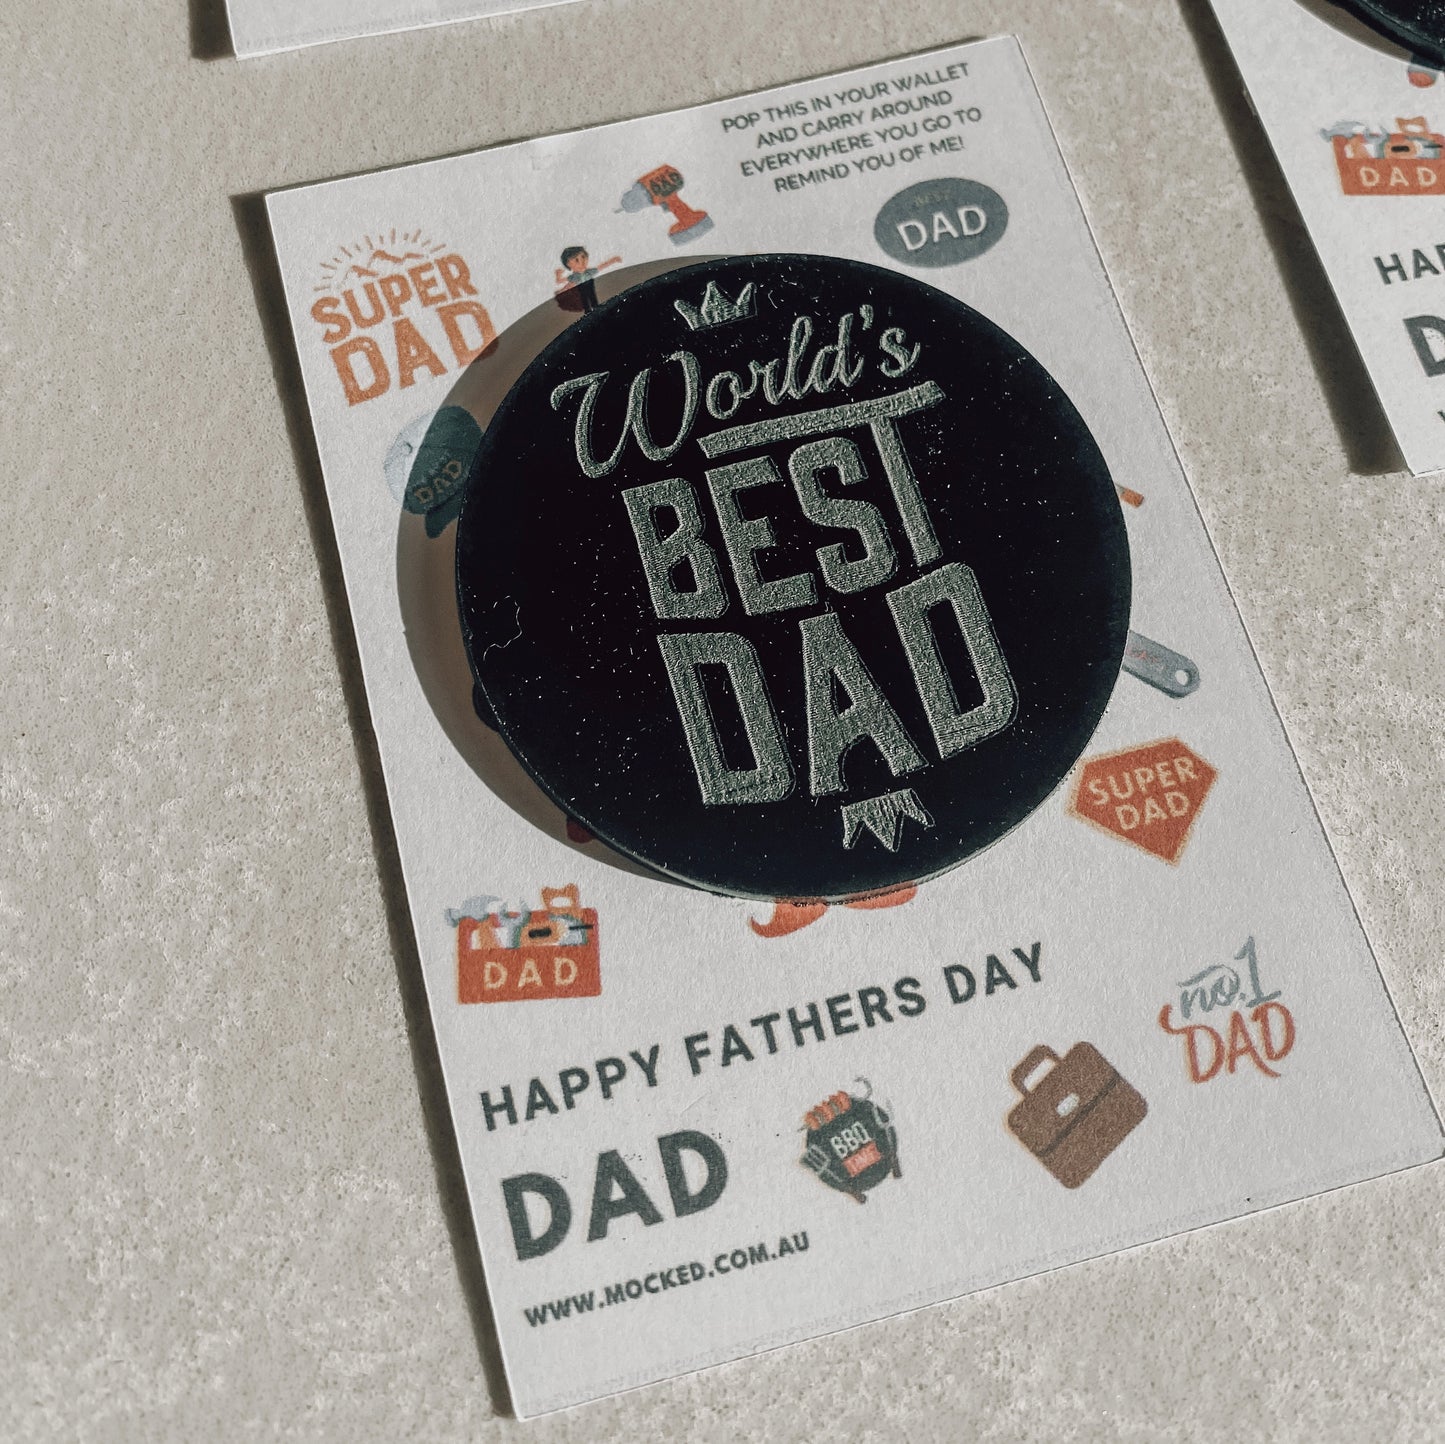 The Father’s Day Card